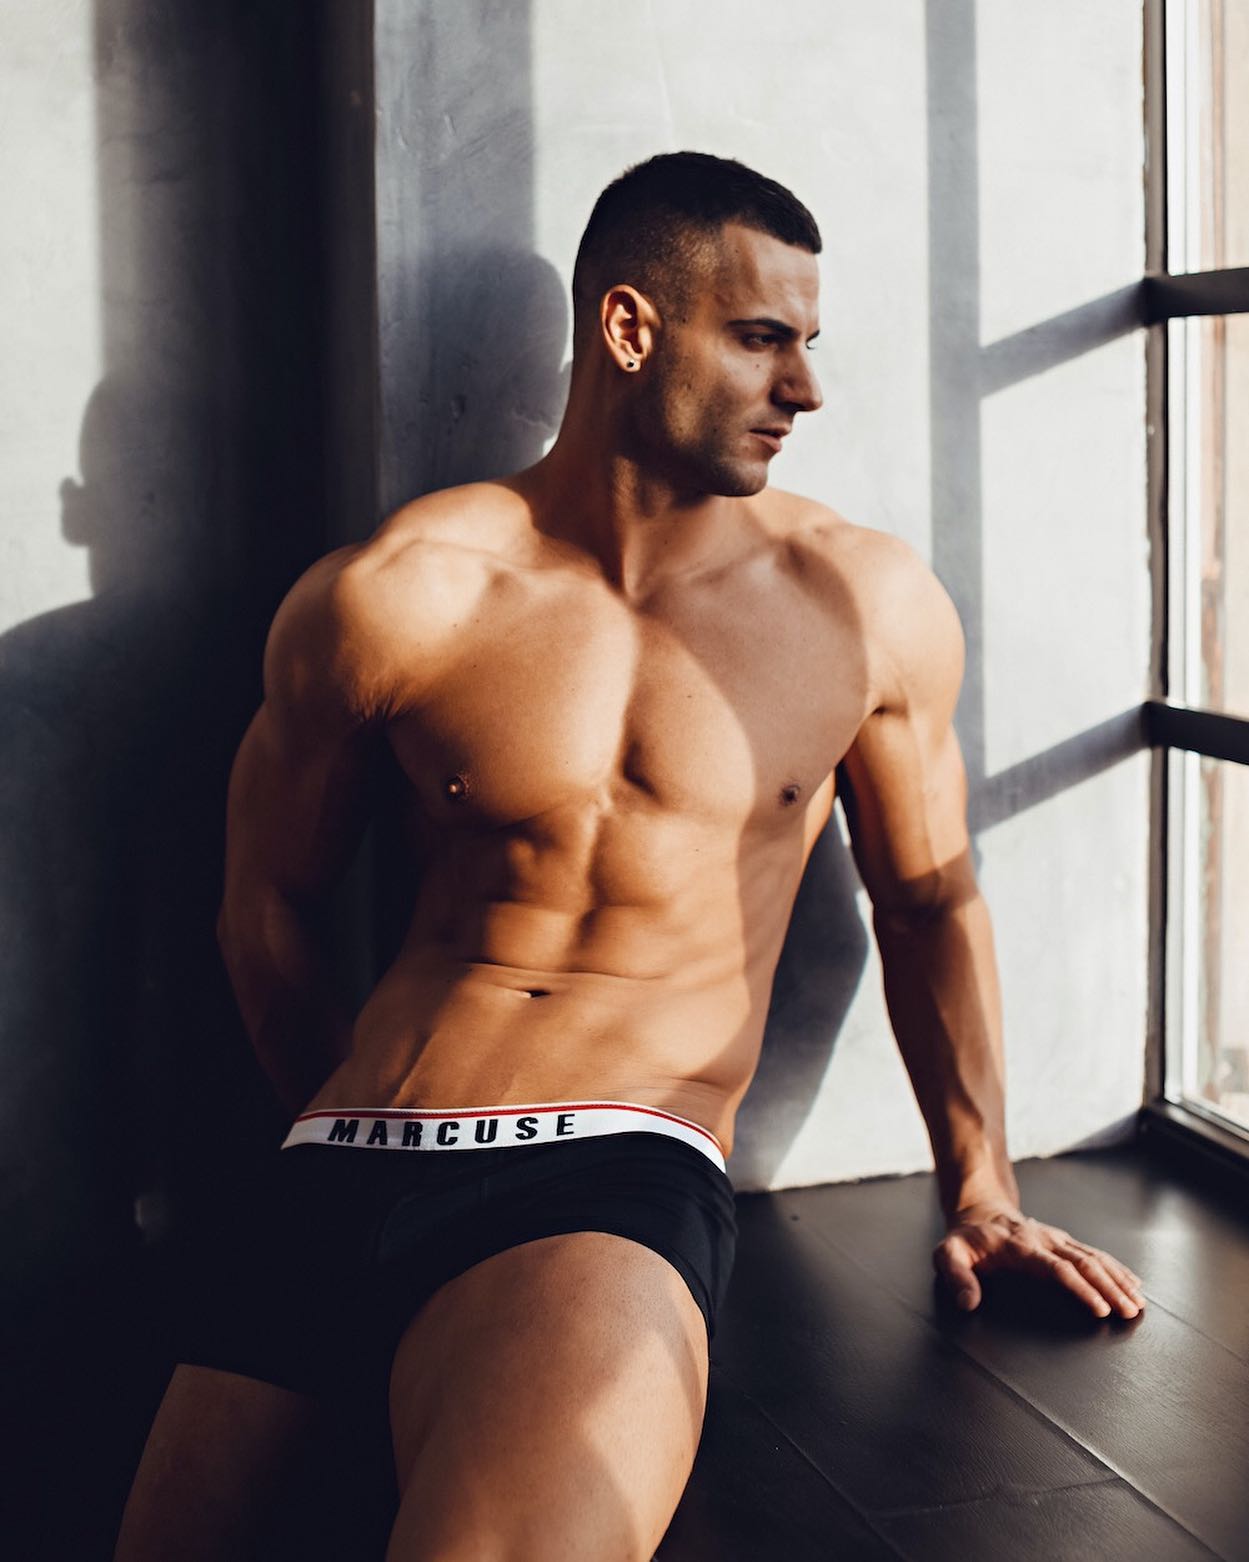 Black trunks by Marcuse from the Urban Collection. Perfect for everyday wear, the gym, or to lounge in. Check them out:
_____
menandunderwear.com/shop